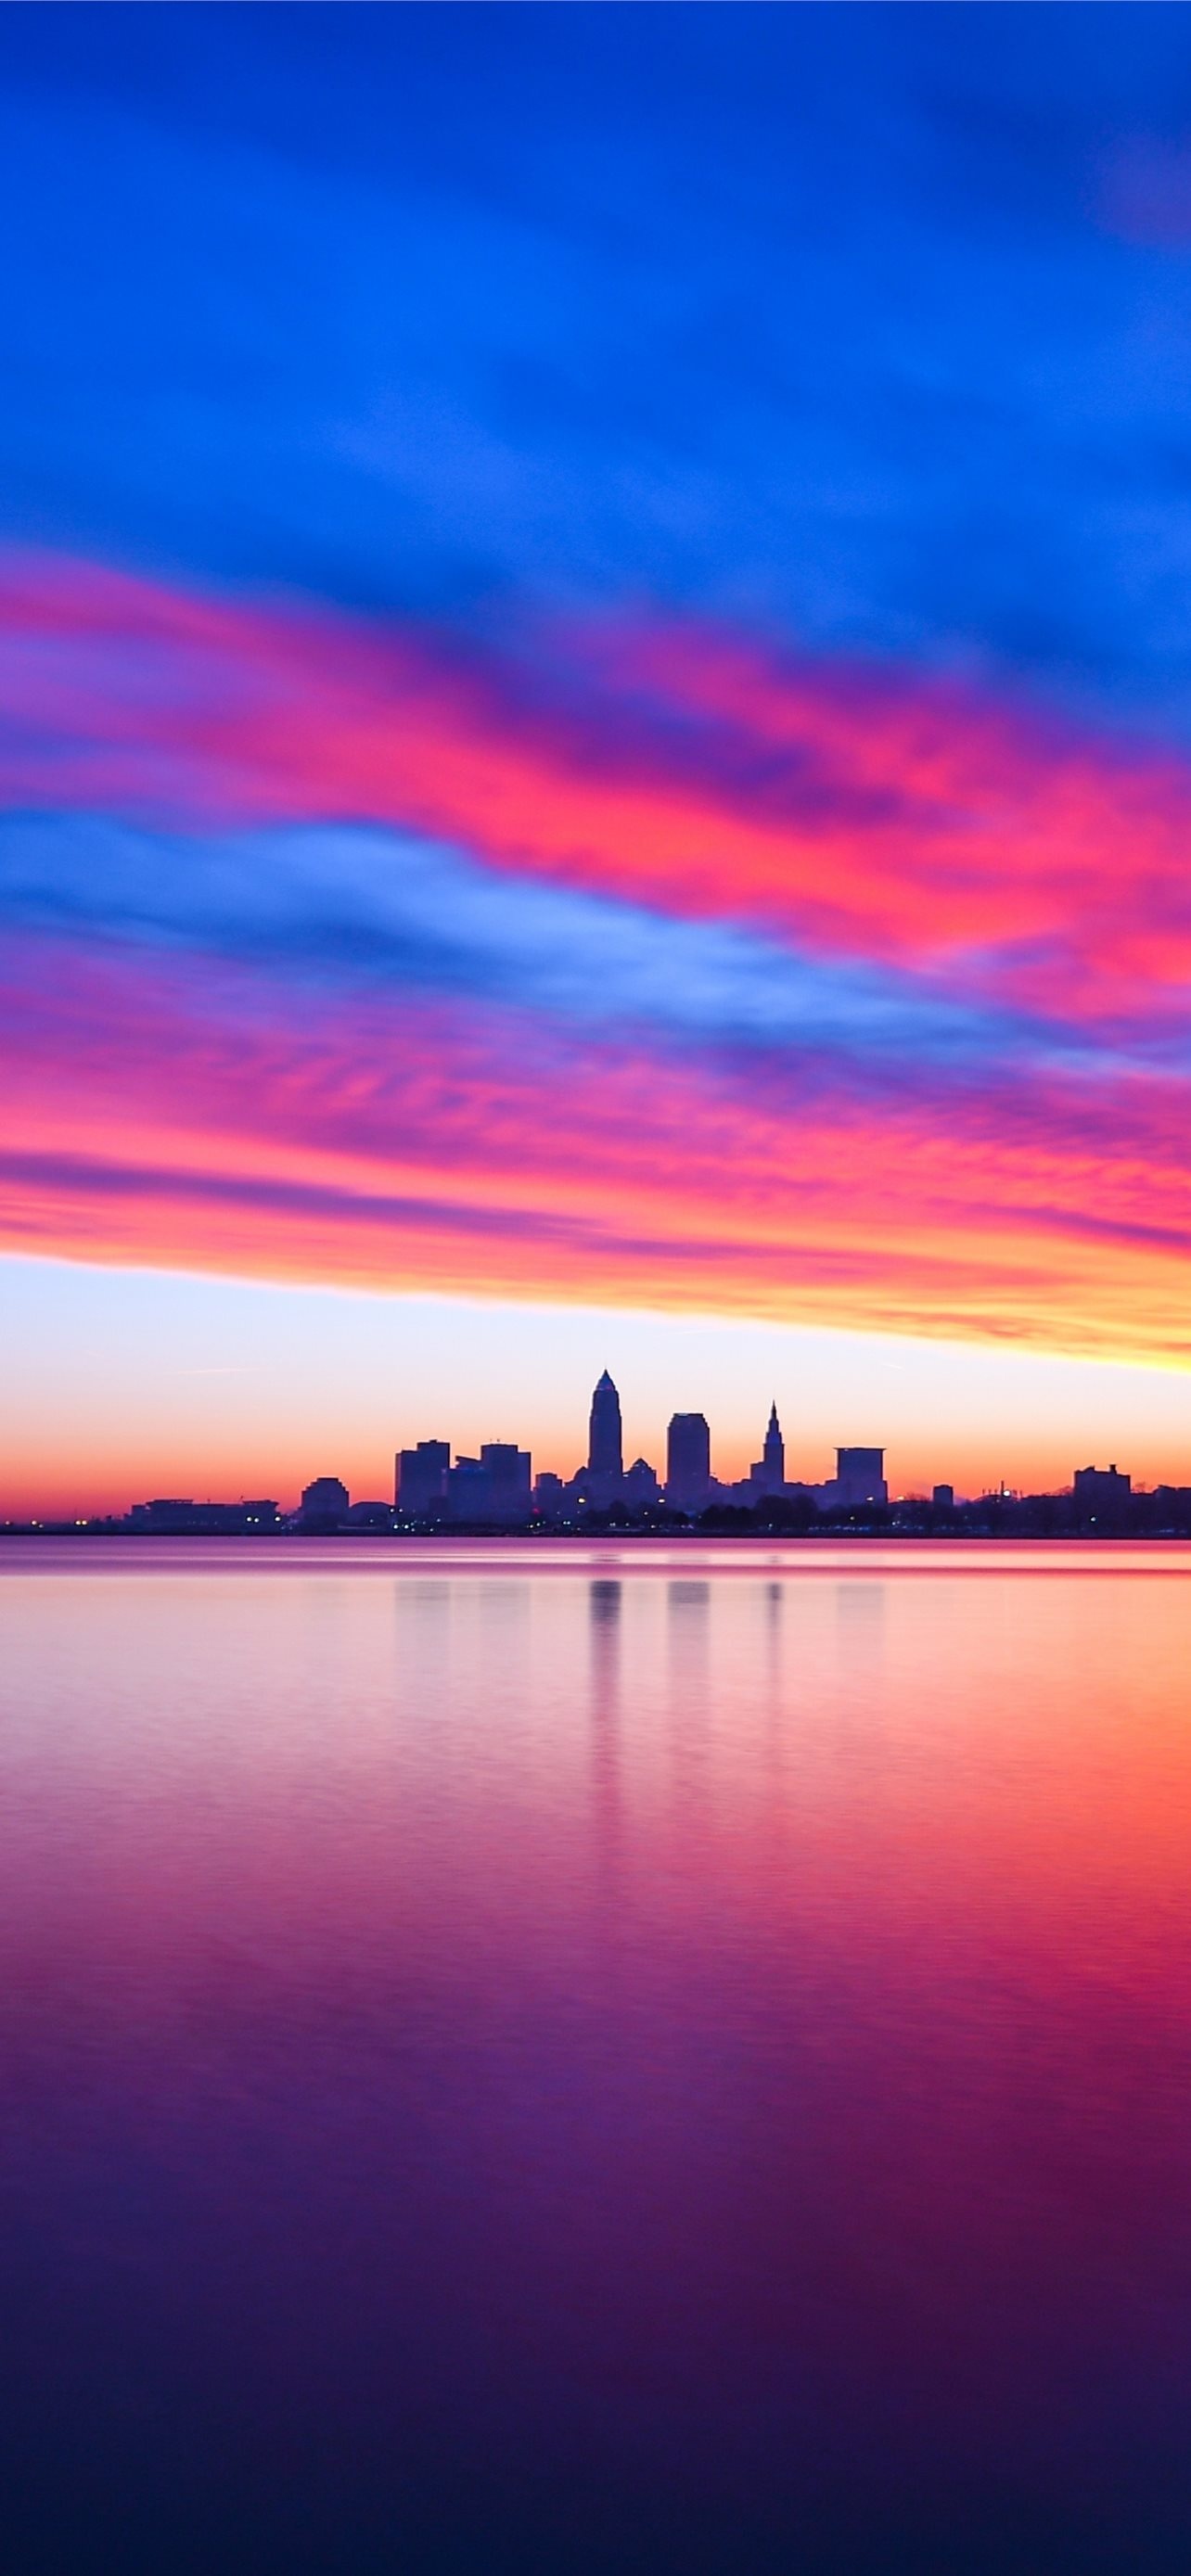 Cleveland, Latest iPhone wallpapers, HD backgrounds, Phone customization, 1290x2780 HD Phone